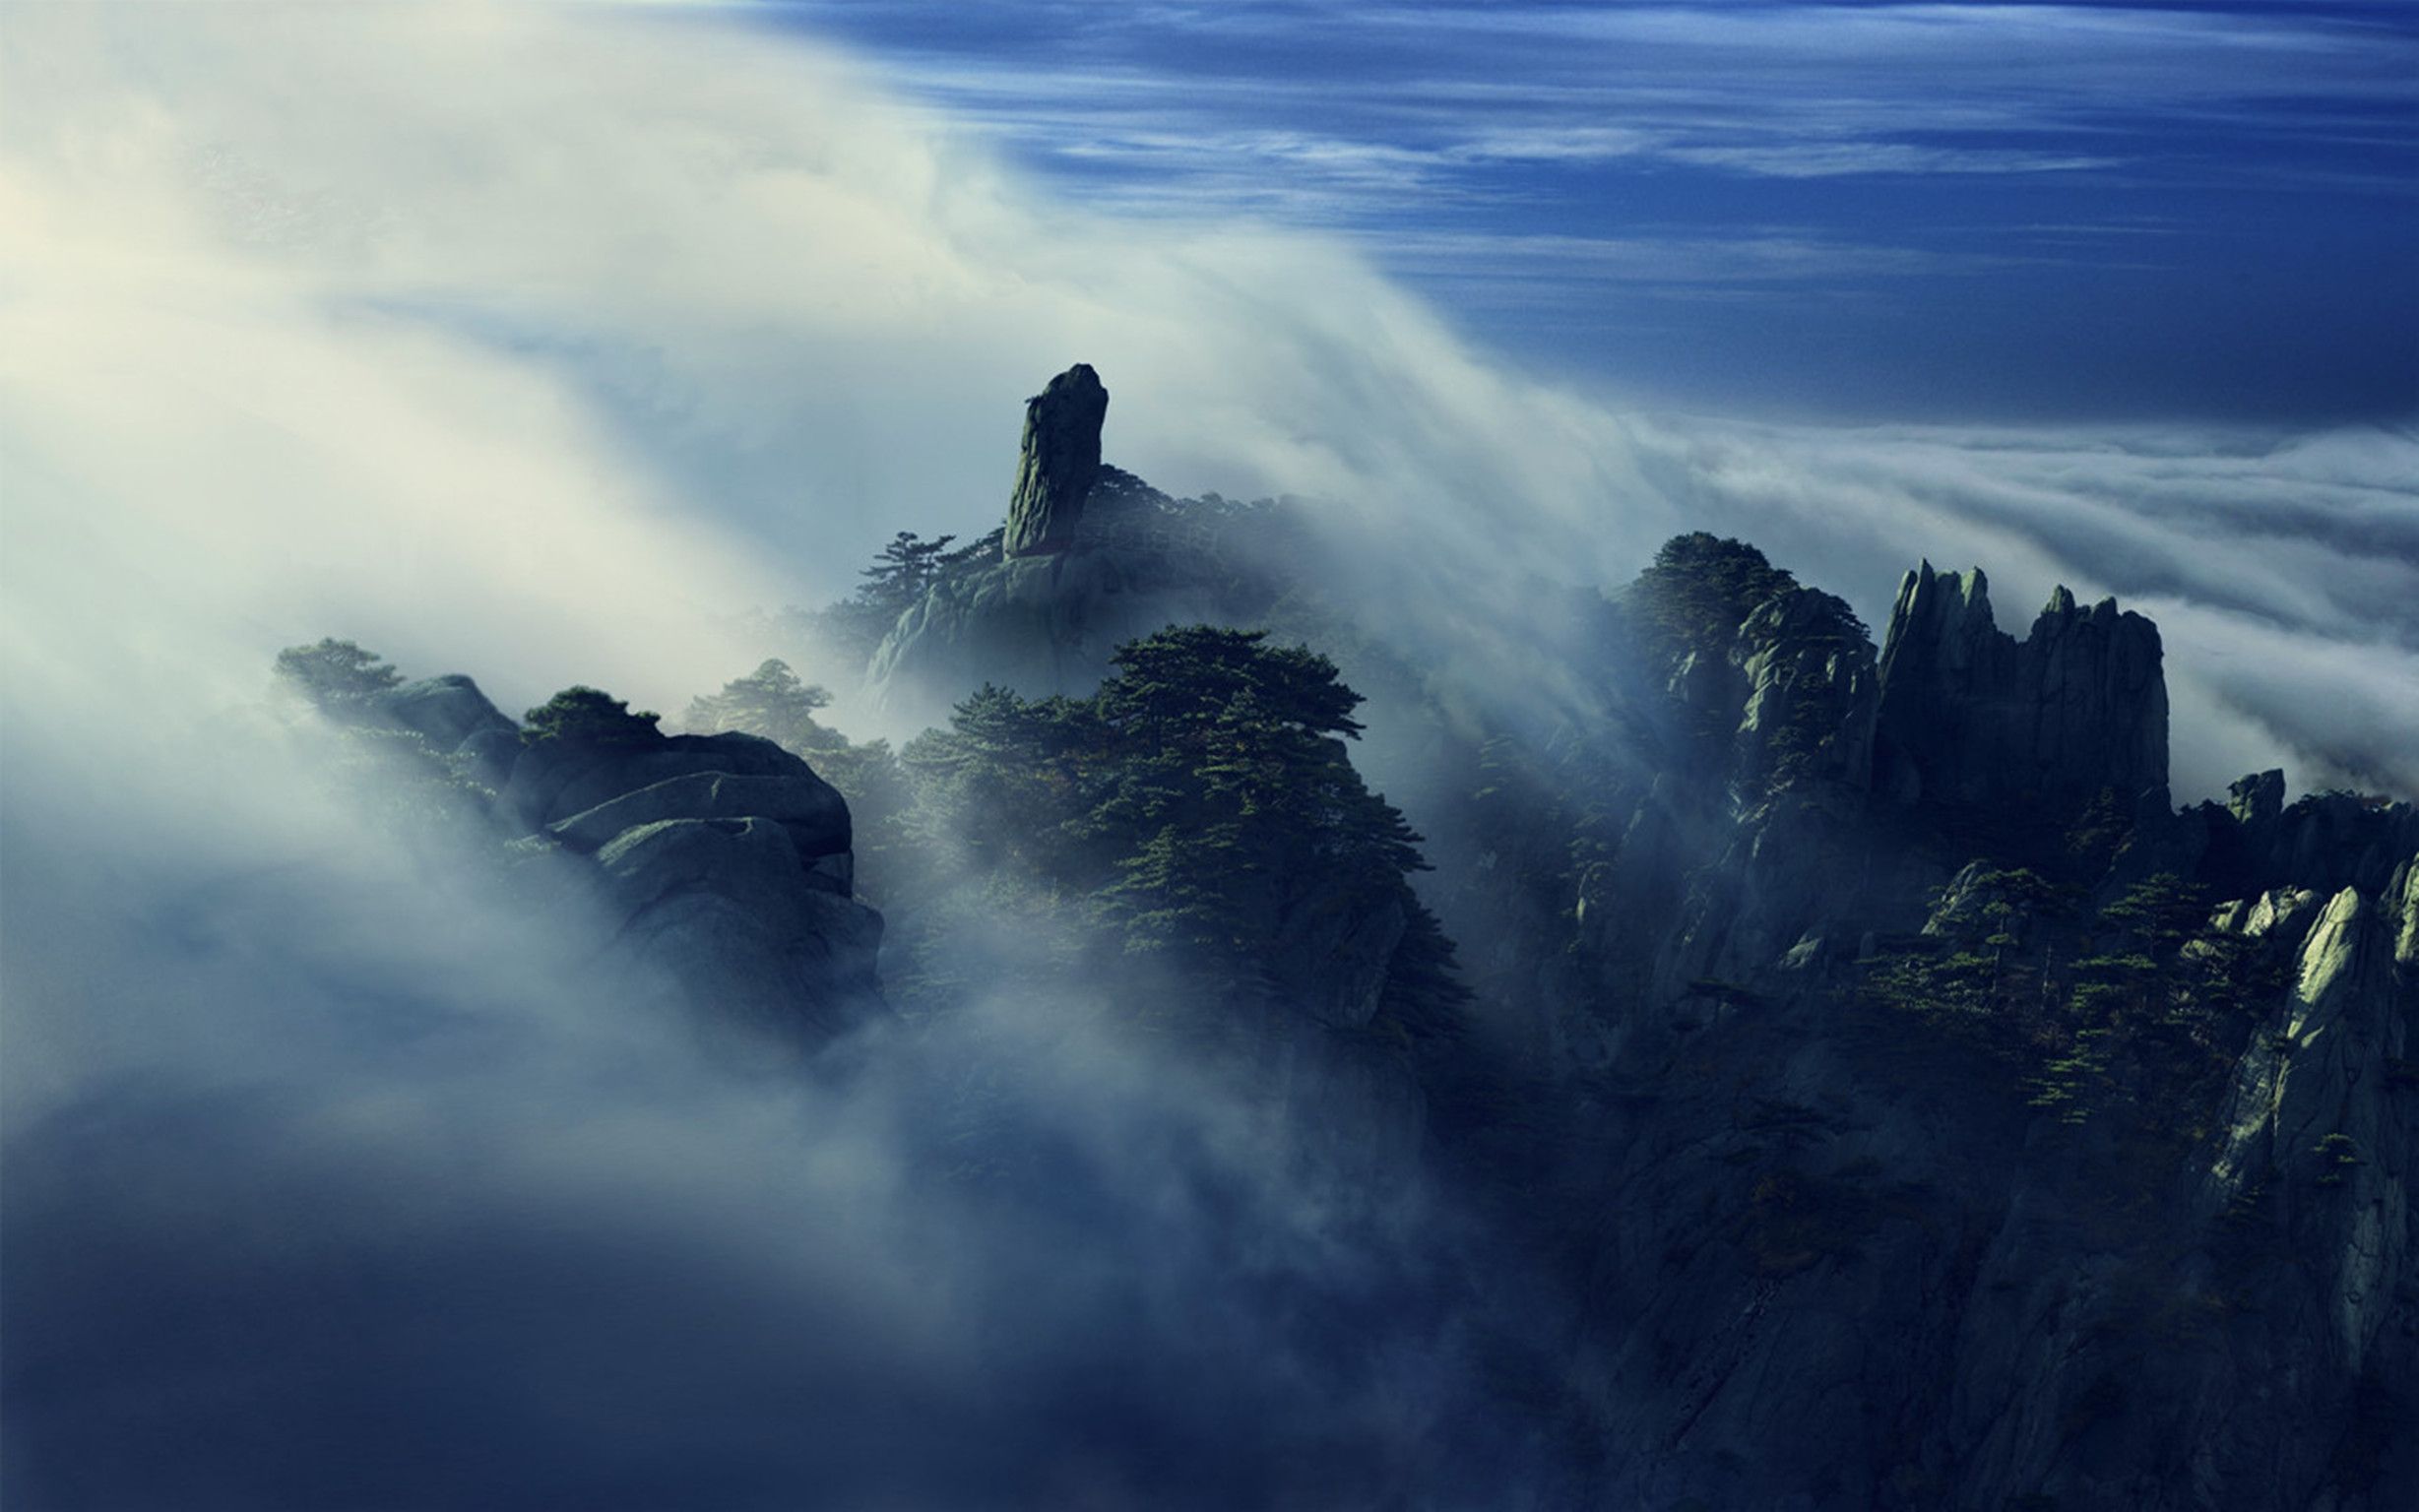 3-Day_Beijing_Huangshan_Sightseeing_Tour_with_Round-trip_High-speed_Train.jpg